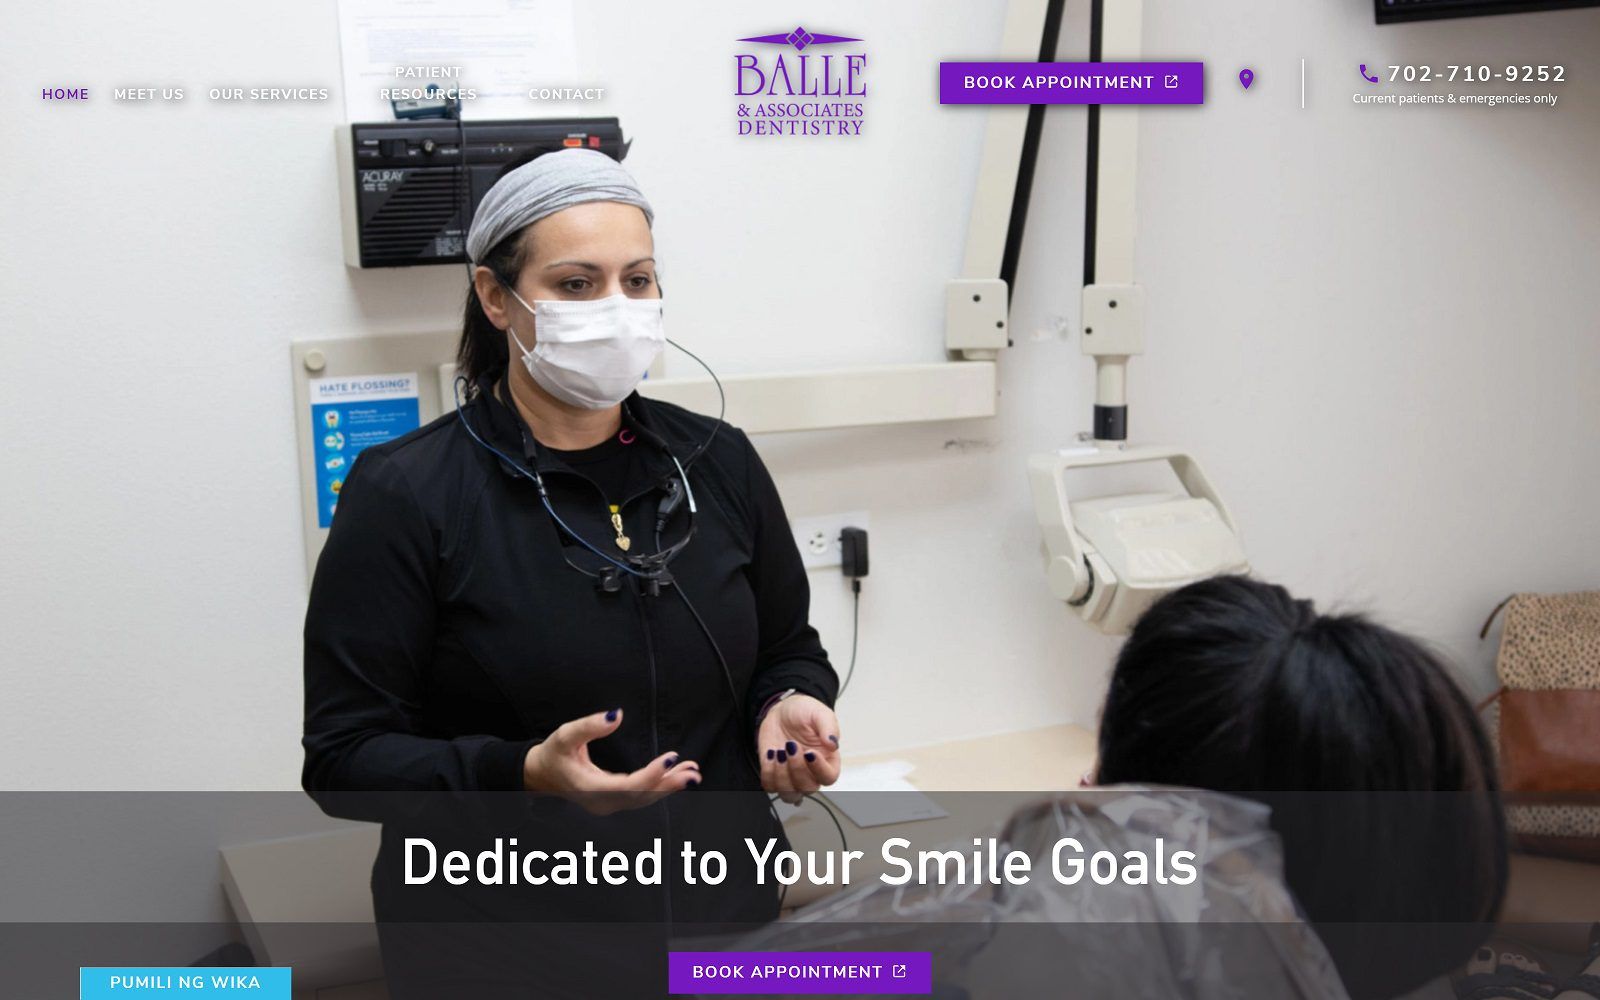 The screenshot of balle & associates cosmetic and family dentistry dr. Peter balle website